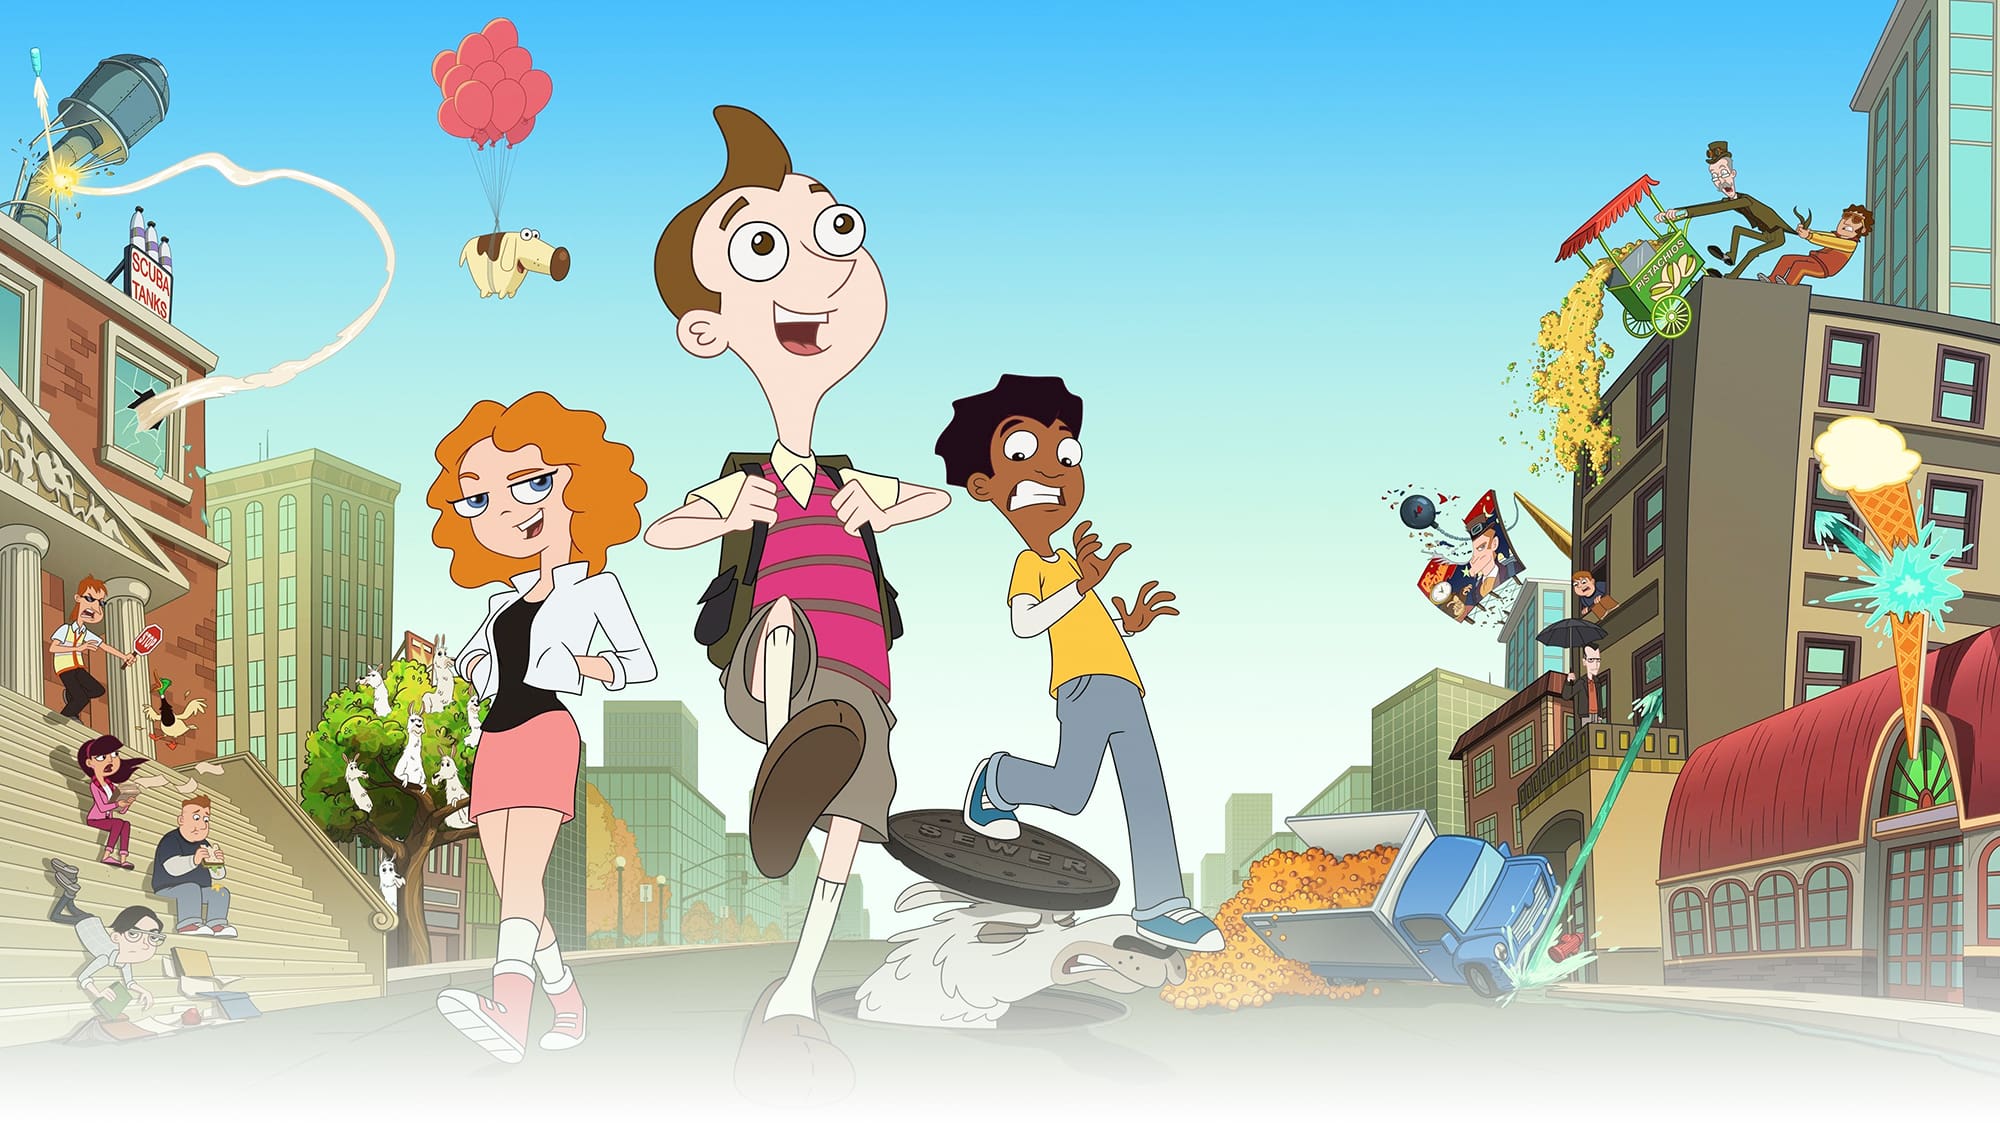 Will there be a third season of Milo Murphy's Law?